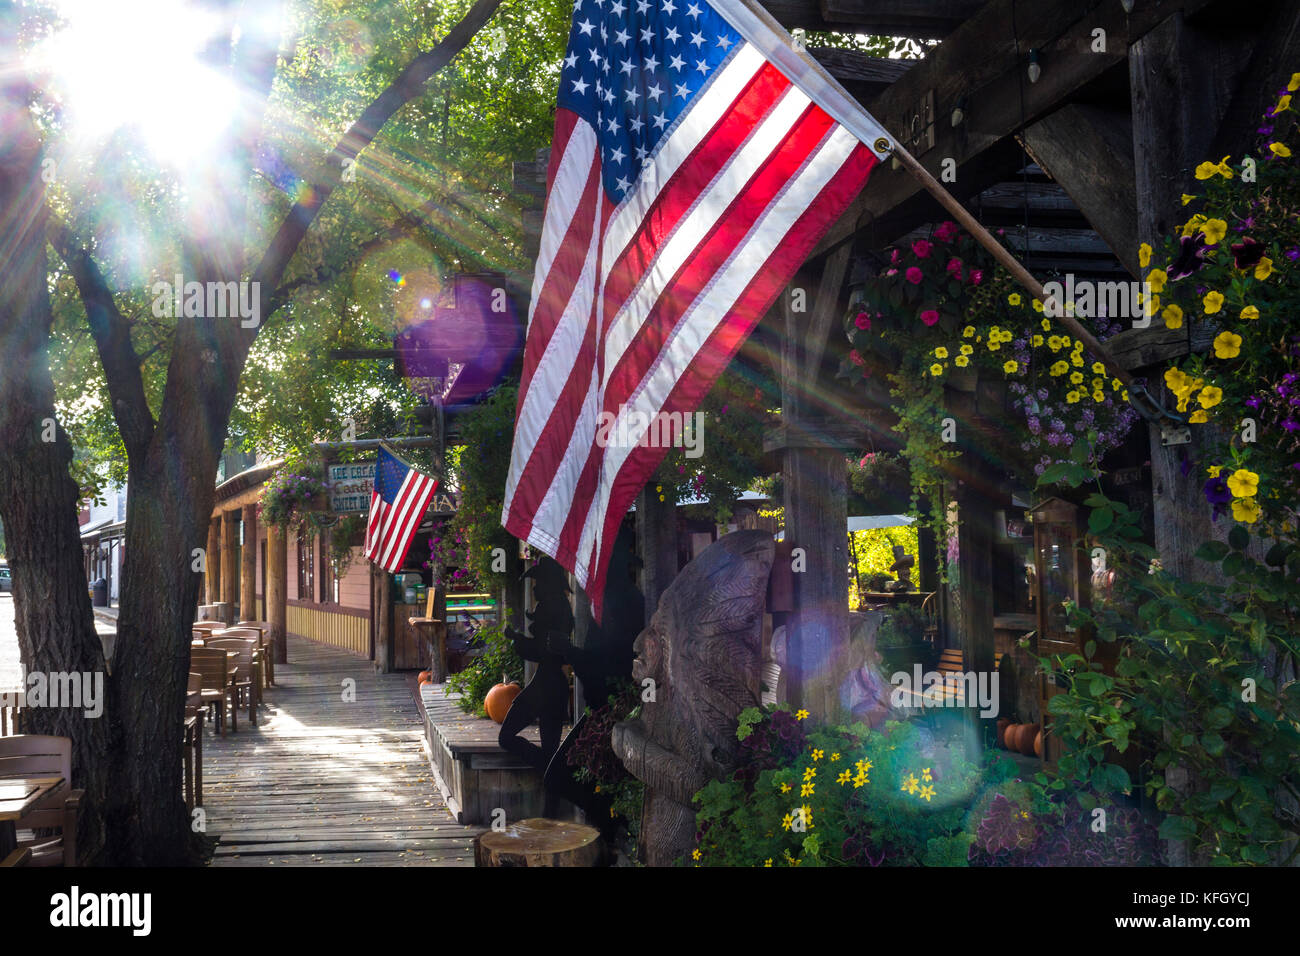 WA14228-00...WASHINGTON - Flags along the street in the town Of Winthorp on the east side of the North Cascades. Stock Photo